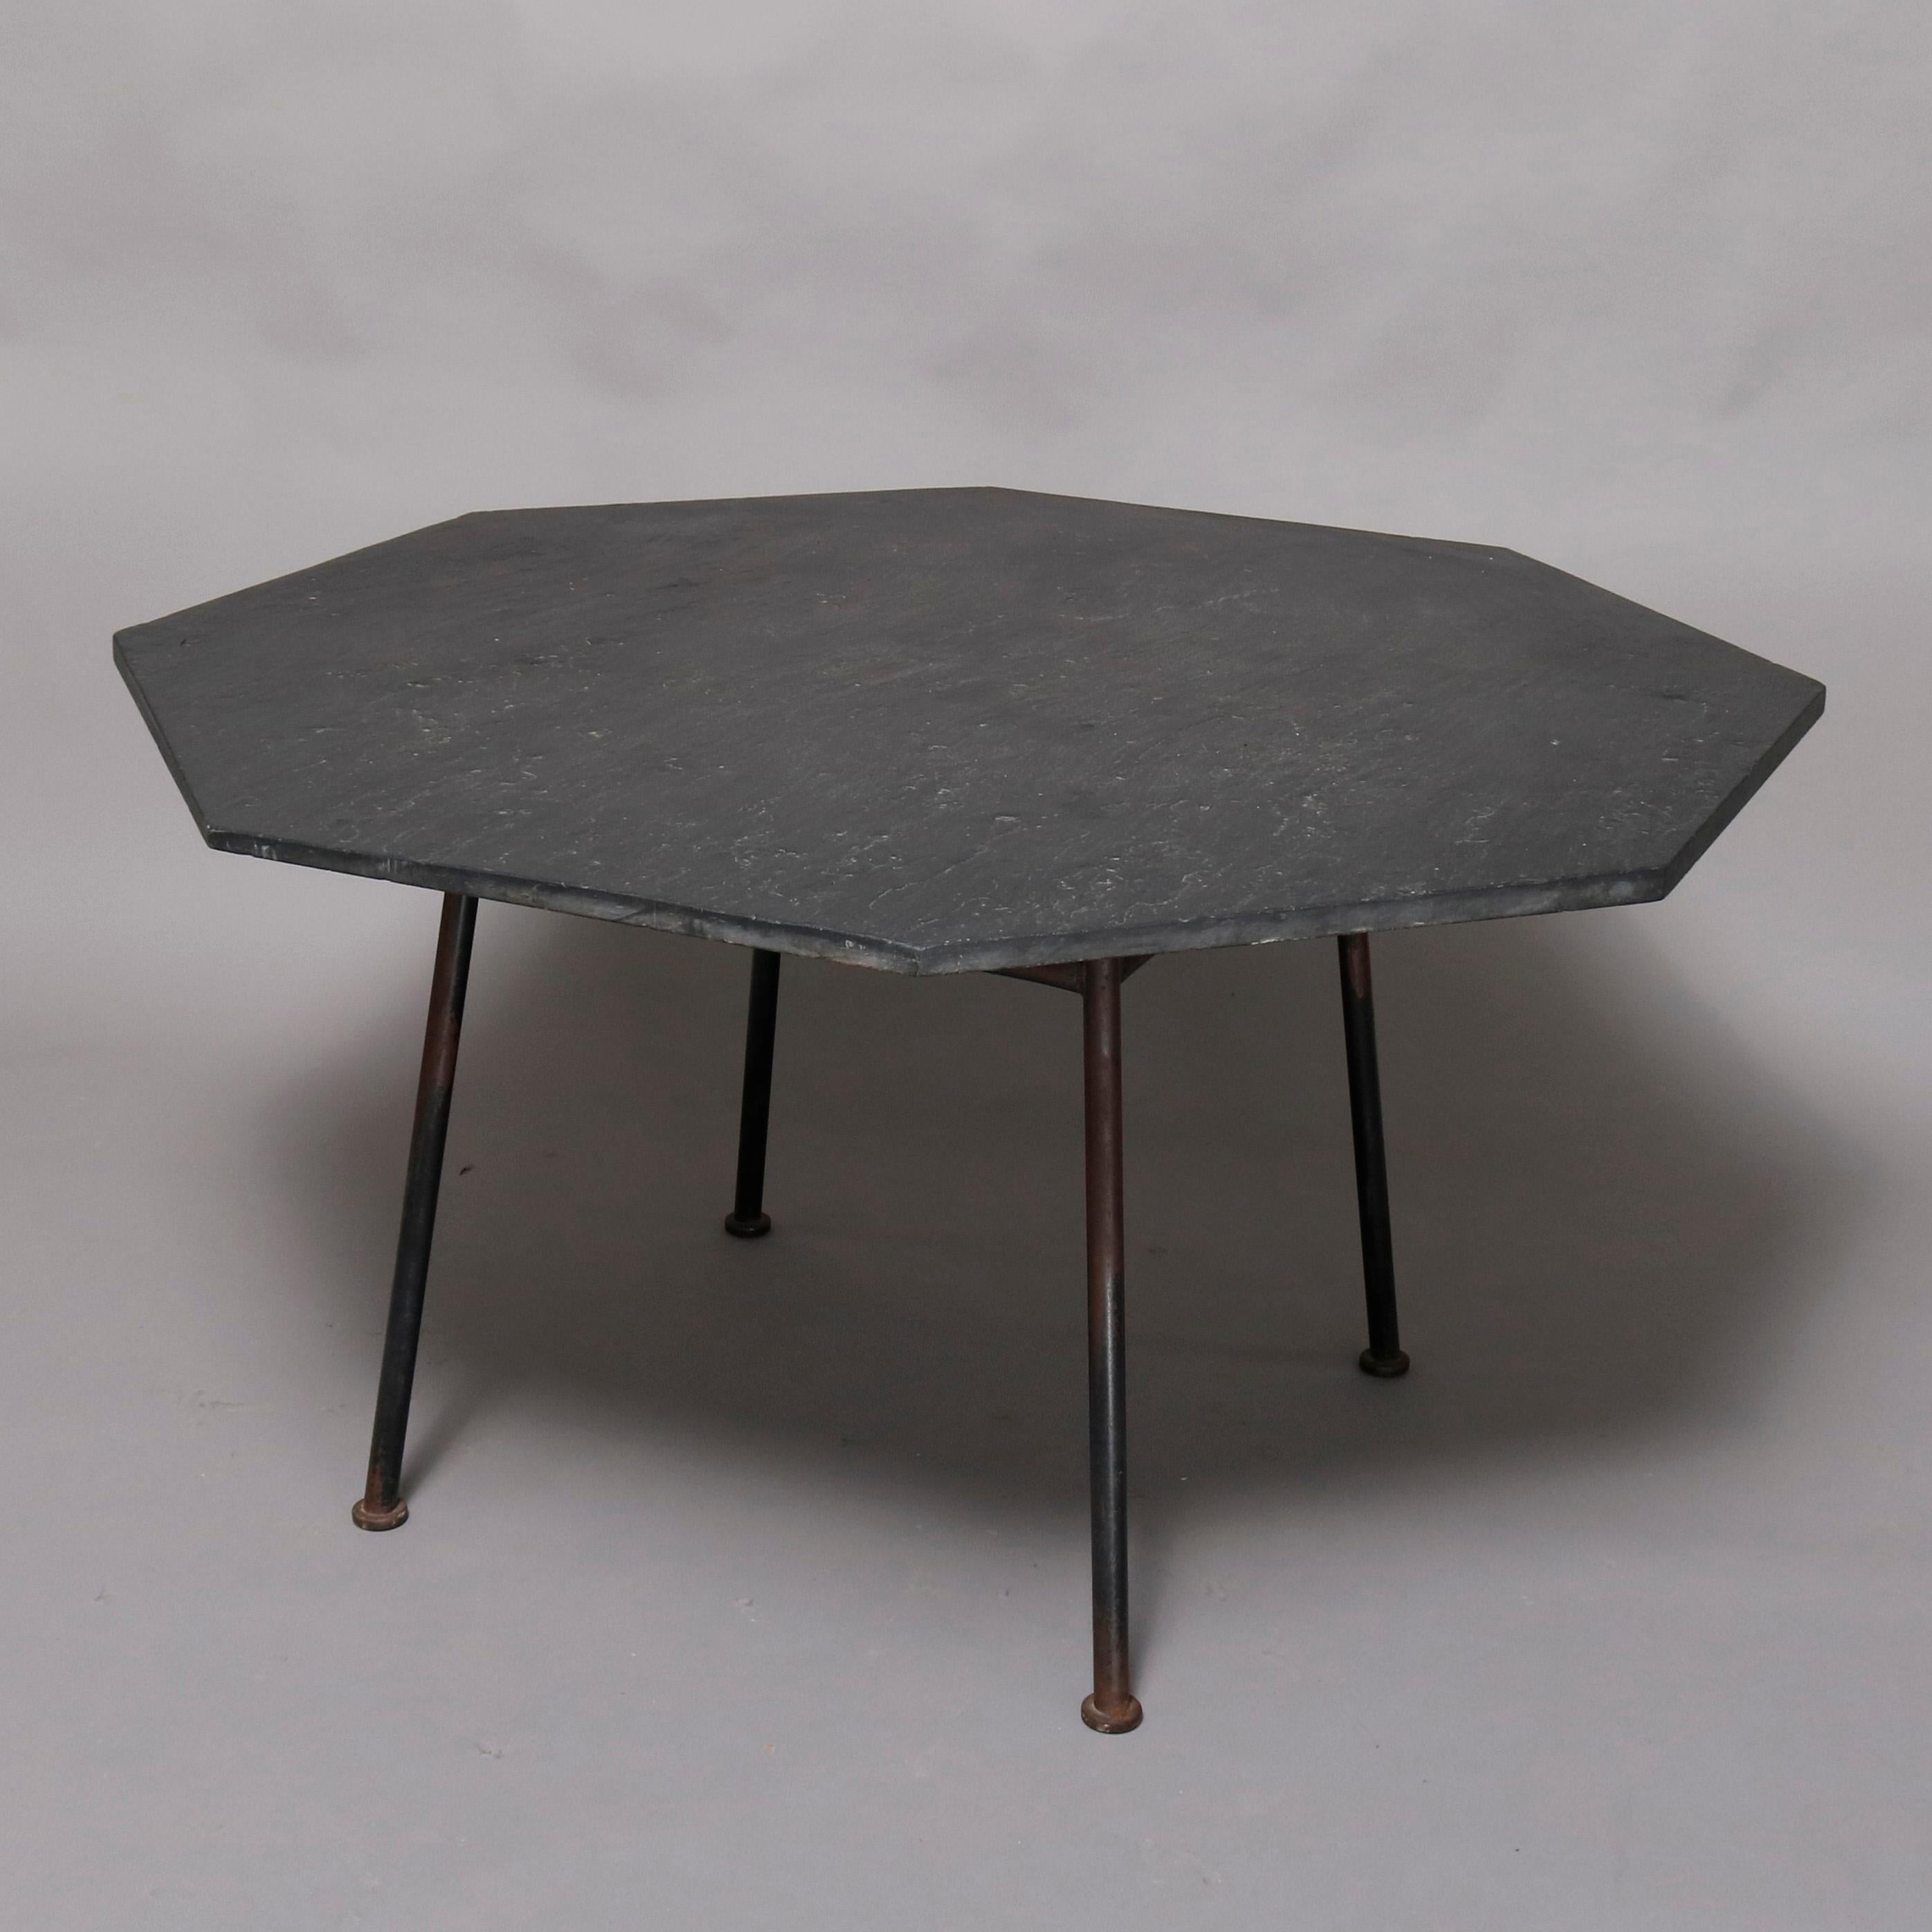 A Mid-Century Modern Russell Woodard dining set offers octagon slate top table on metal legs and six metal mesh chairs having vinyl cushions, circa 1960

***DELIVERY NOTICE – Due to COVID-19 we are employing NO-CONTACT PRACTICES in the transfer of